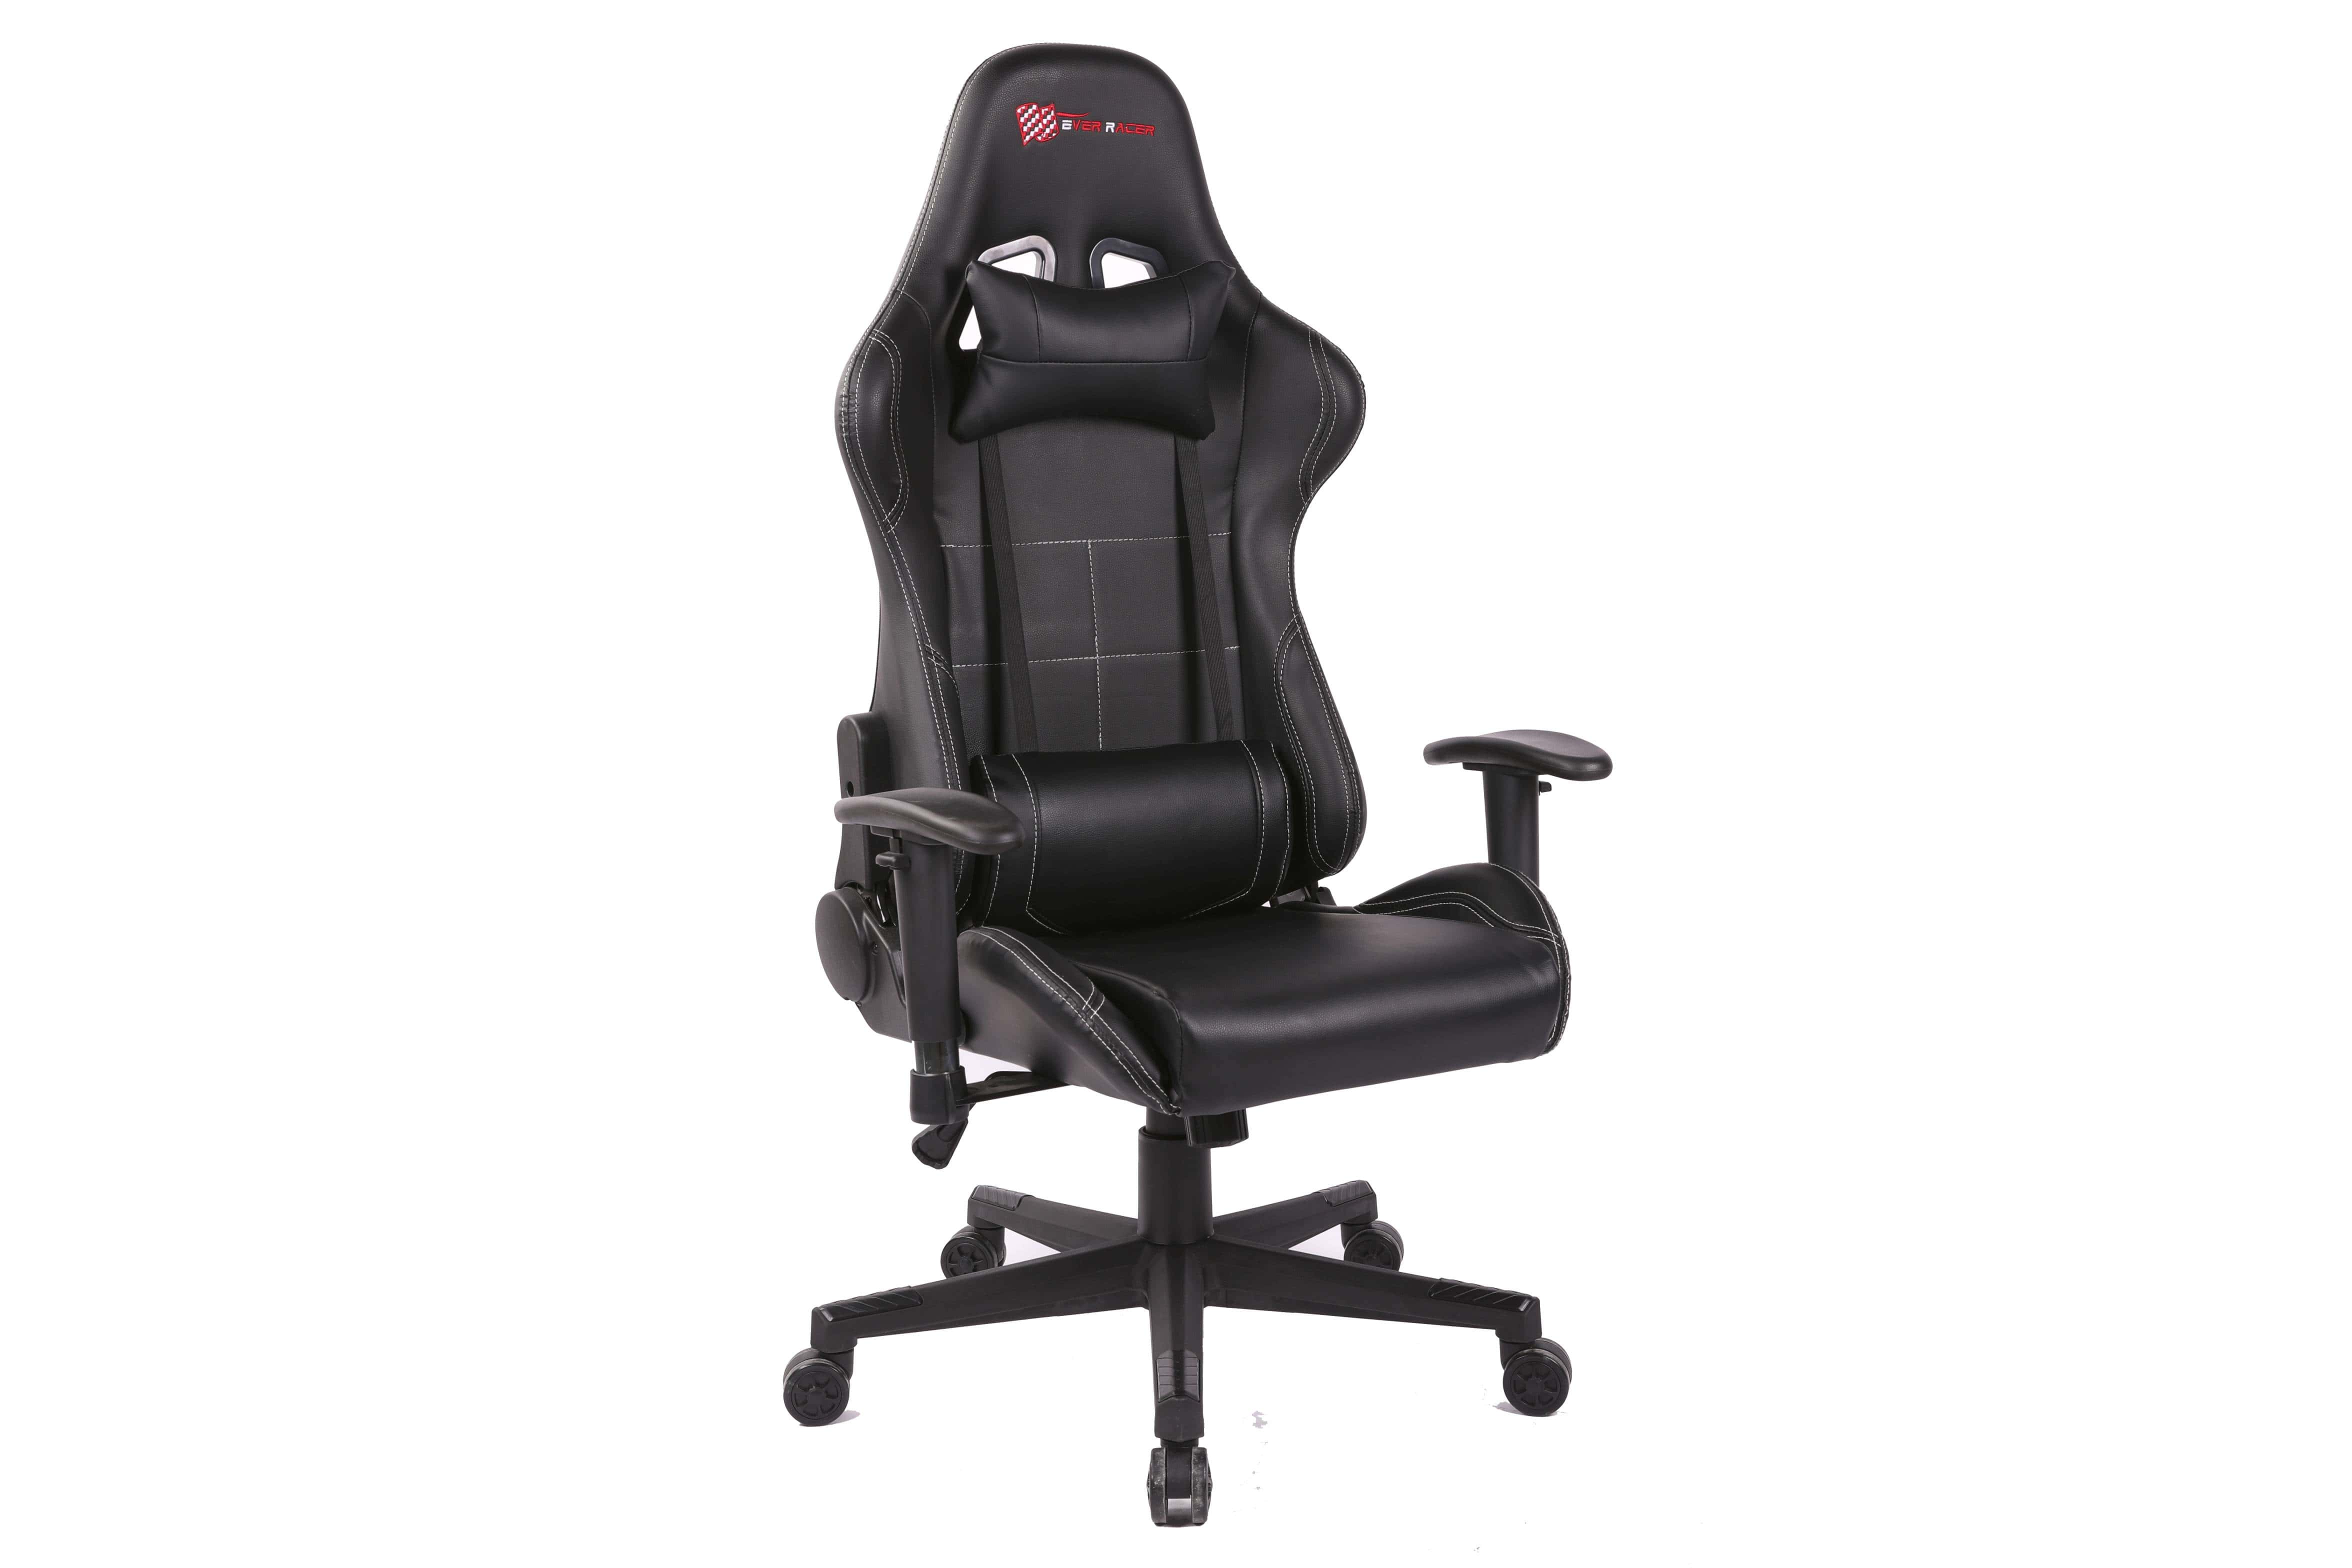 New EverRacer Gaming Office Chair PU Leather Black